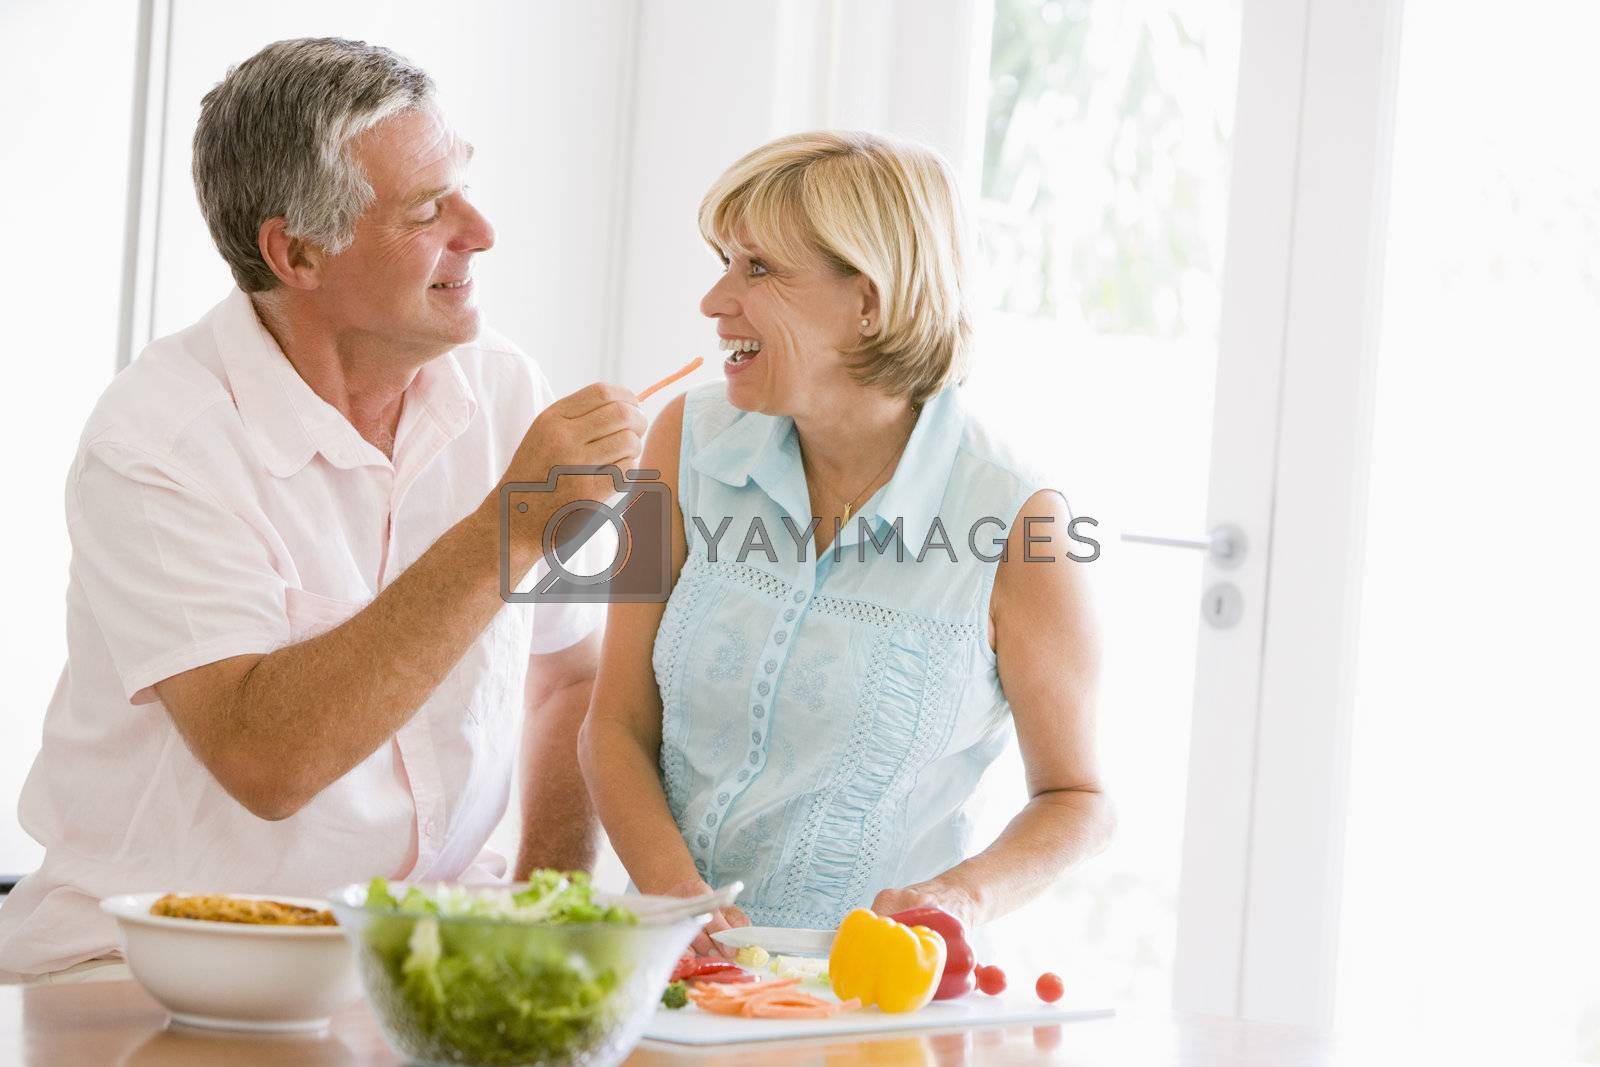 Royalty free image of Husband And Wife Preparing meal,mealtime Together by MonkeyBusiness